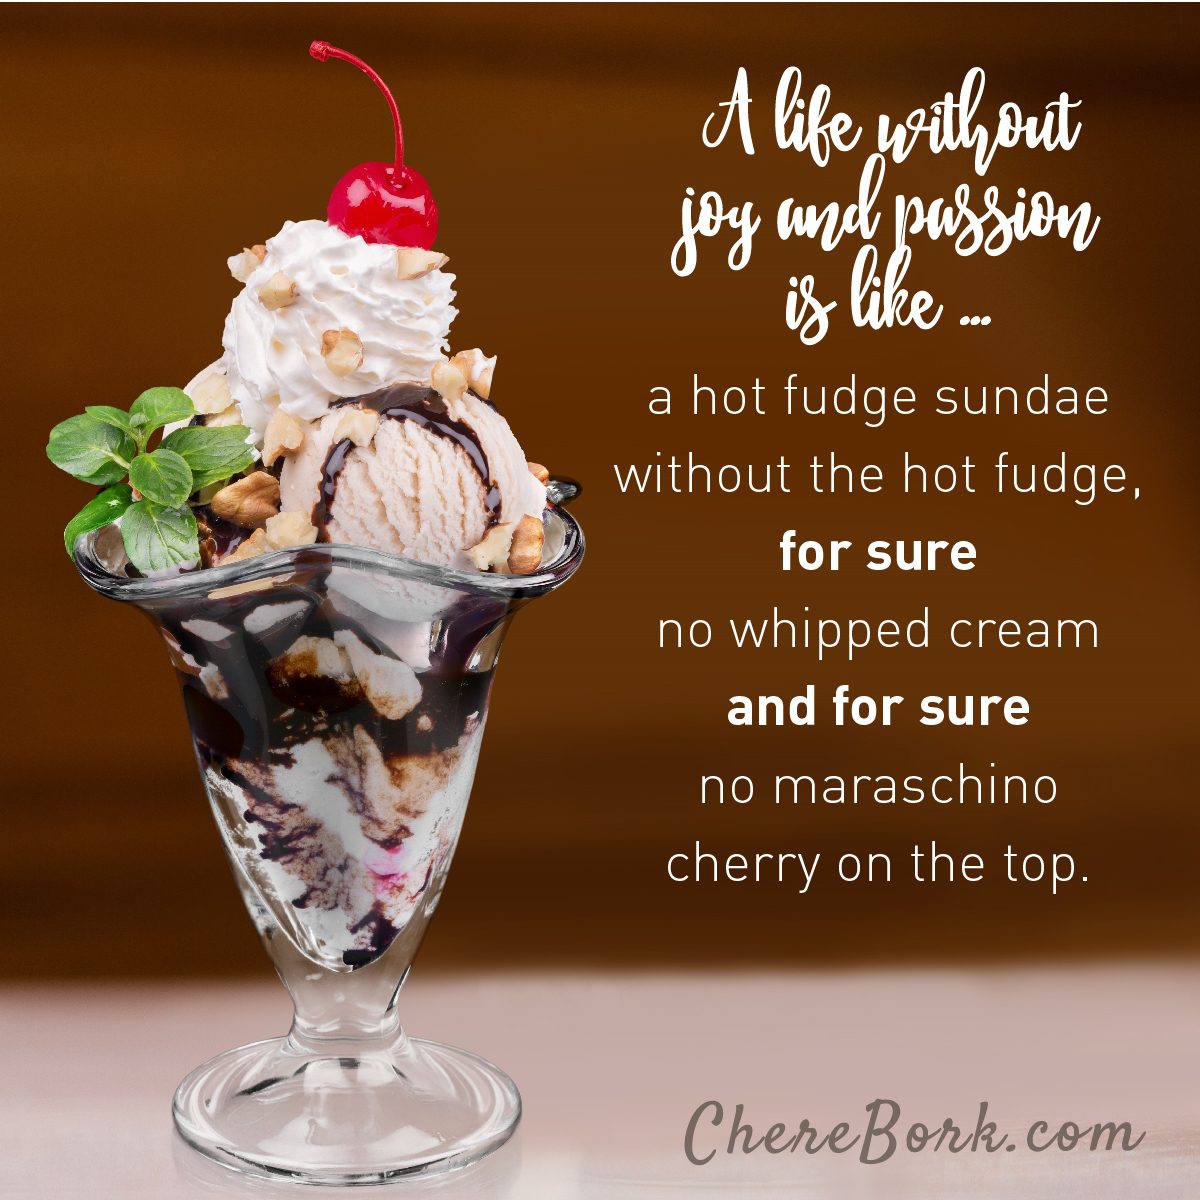 A life without joy and passion is like a hot fudge sundae without the hot fudge, for sure no whipped cream and for sure no maraschino cherry on the top -Chere Bork